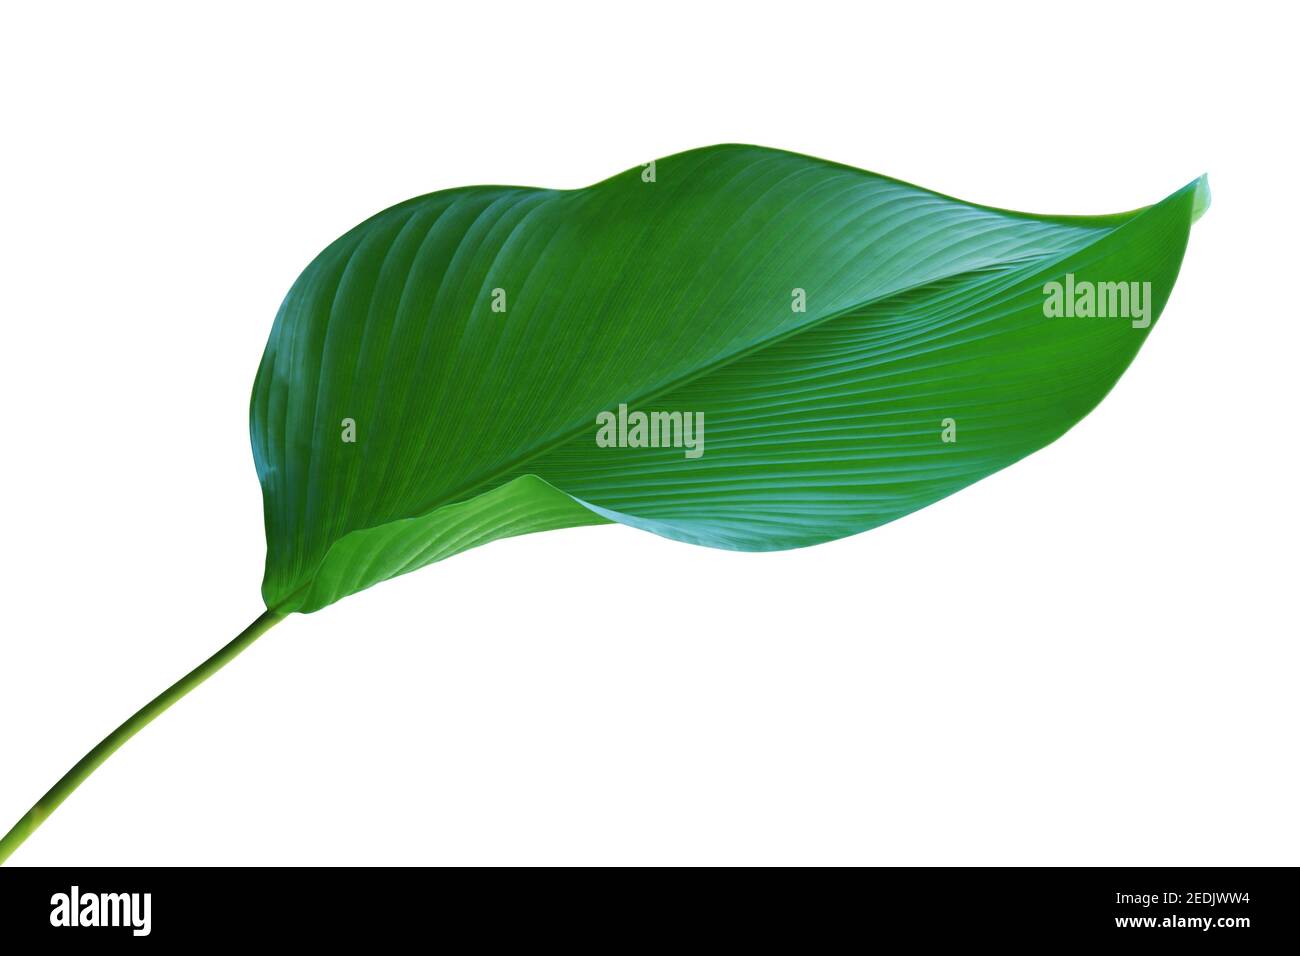 Tropical Green Leaf of Calathea lutea (Aubl.) G. Mey., Cigar Calathea Plant Isolated on White Background with Clipping Path Stock Photo